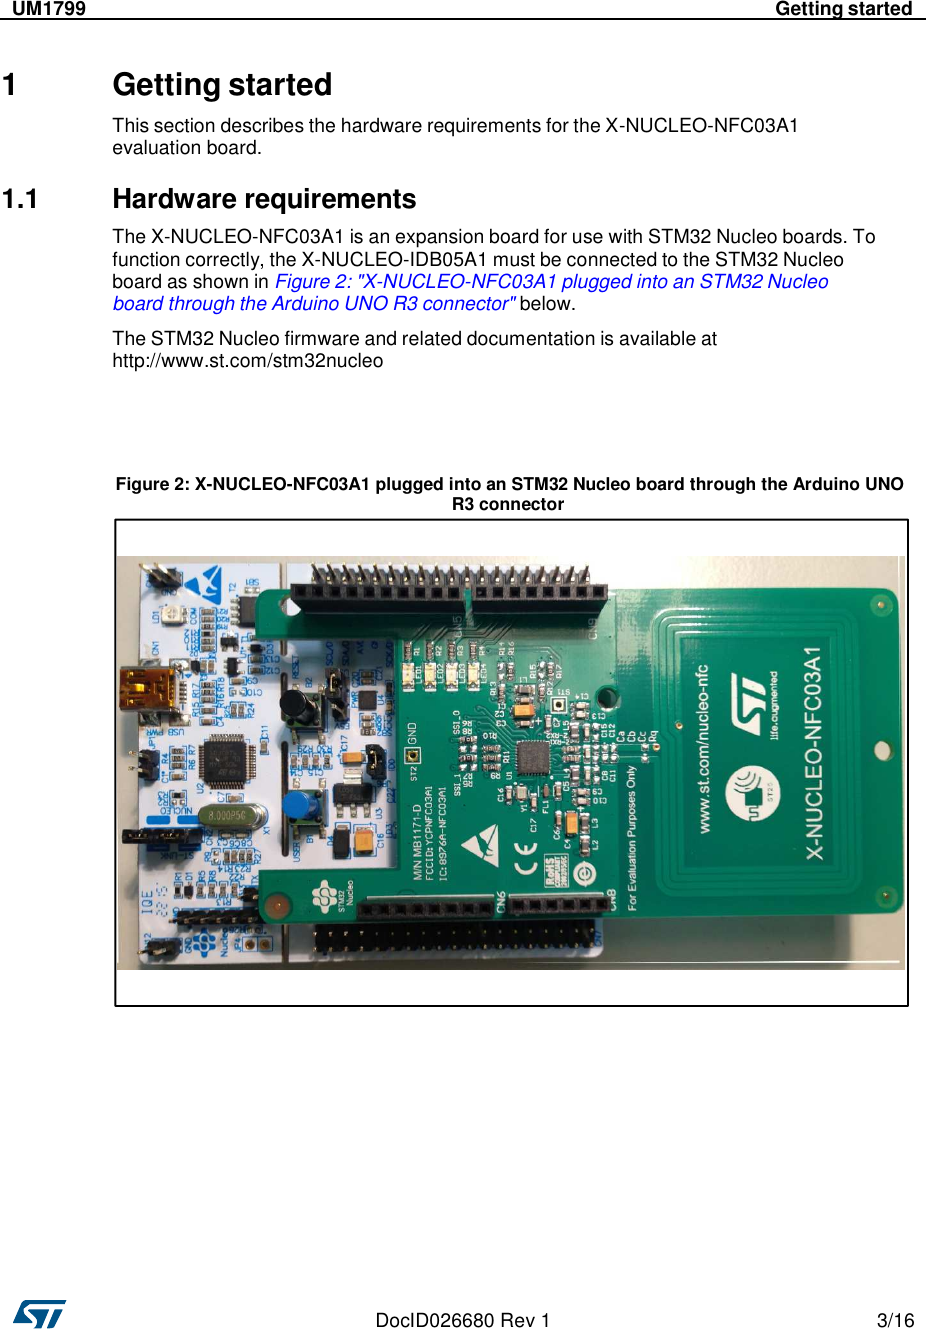    DocID026680 Rev 1  3/16      UM1799  Getting started     1 Getting started  This section describes the hardware requirements for the X-NUCLEO-NFC03A1 evaluation board.  1.1  Hardware requirements  The X-NUCLEO-NFC03A1 is an expansion board for use with STM32 Nucleo boards. To function correctly, the X-NUCLEO-IDB05A1 must be connected to the STM32 Nucleo board as shown in Figure 2: &quot;X-NUCLEO-NFC03A1 plugged into an STM32 Nucleo board through the Arduino UNO R3 connector&quot; below.  The STM32 Nucleo firmware and related documentation is available at http://www.st.com/stm32nucleo      Figure 2: X-NUCLEO-NFC03A1 plugged into an STM32 Nucleo board through the Arduino UNO R3 connector                    